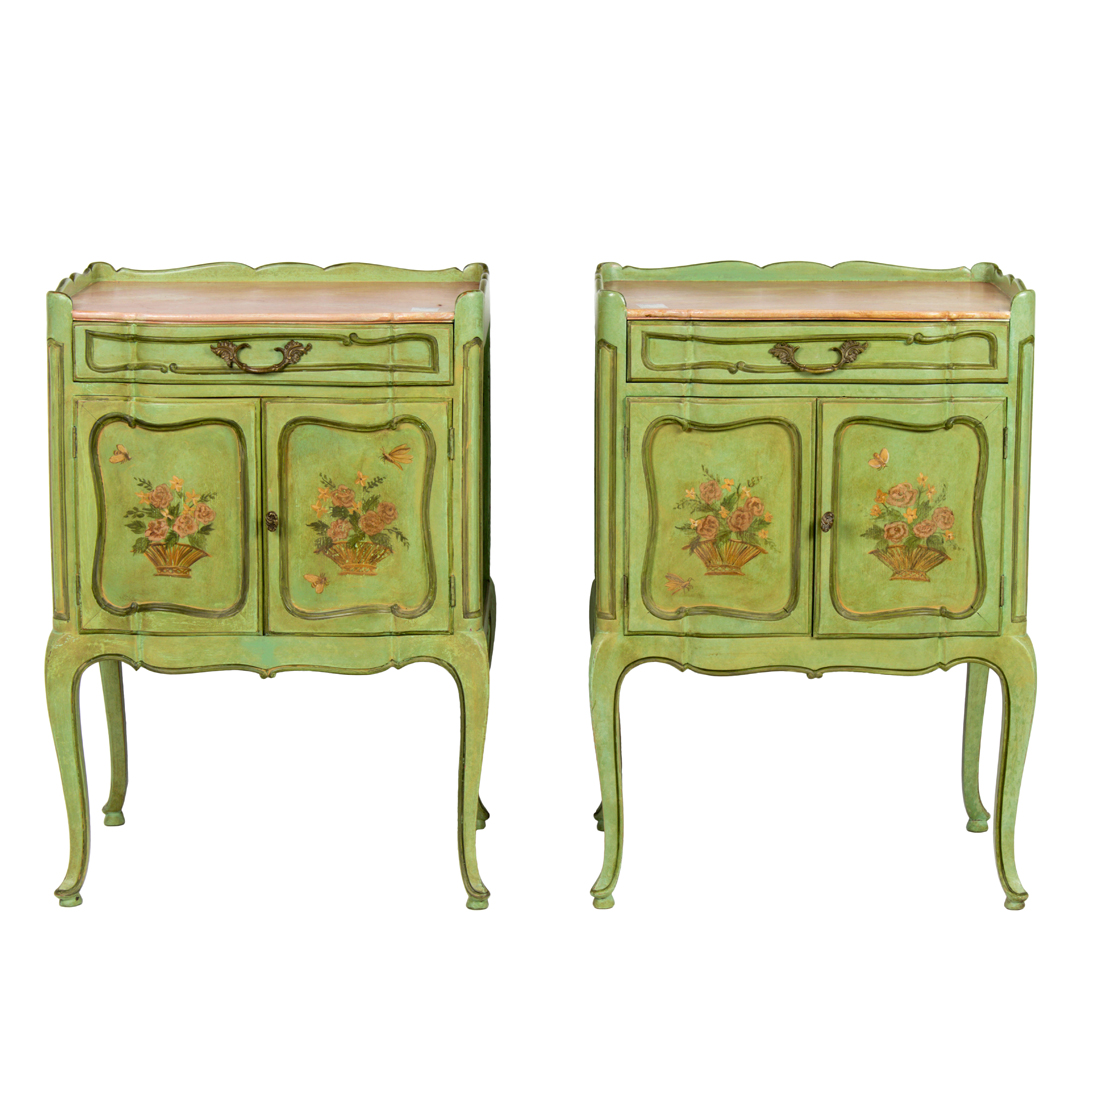 PAIR OF LOUIS XV STYLE GREEN PAINTED